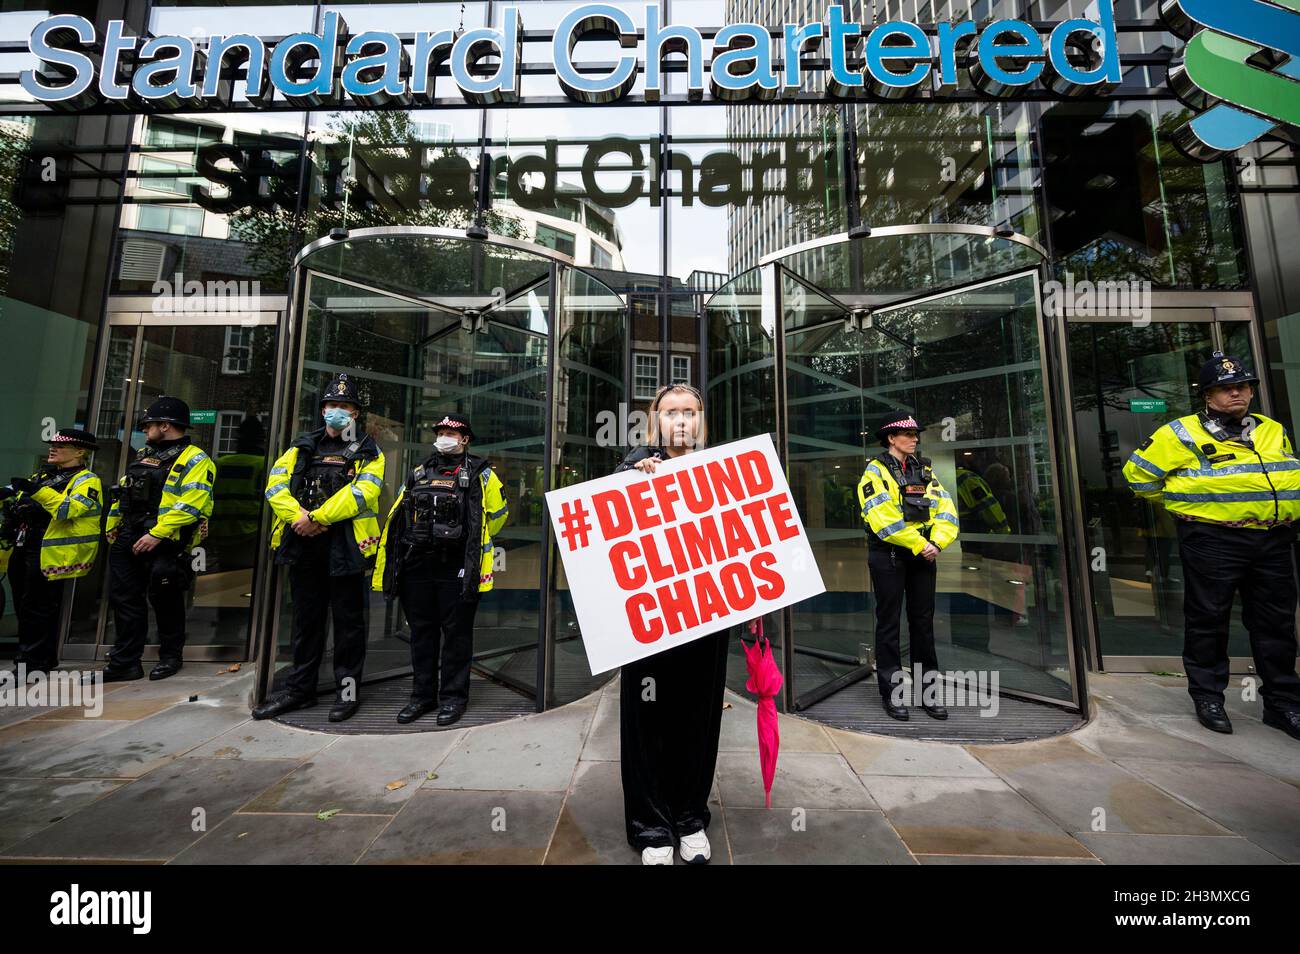 London, UK.  29 October 2021.  A youth climate activist protests outside Standard Chartered in the City of London to demand a stop to funding fossil fuels. The bank is reported to have financed US$31.4bn to the fossil fuel sector since the Paris Agreement was signed.  The protest is part of the wider Defund Climate Chaos campaign and comes as the UN Climate Change Conference of the Parties (COP26) takes place in Glasgow. Credit: Stephen Chung / Alamy Live News Stock Photo